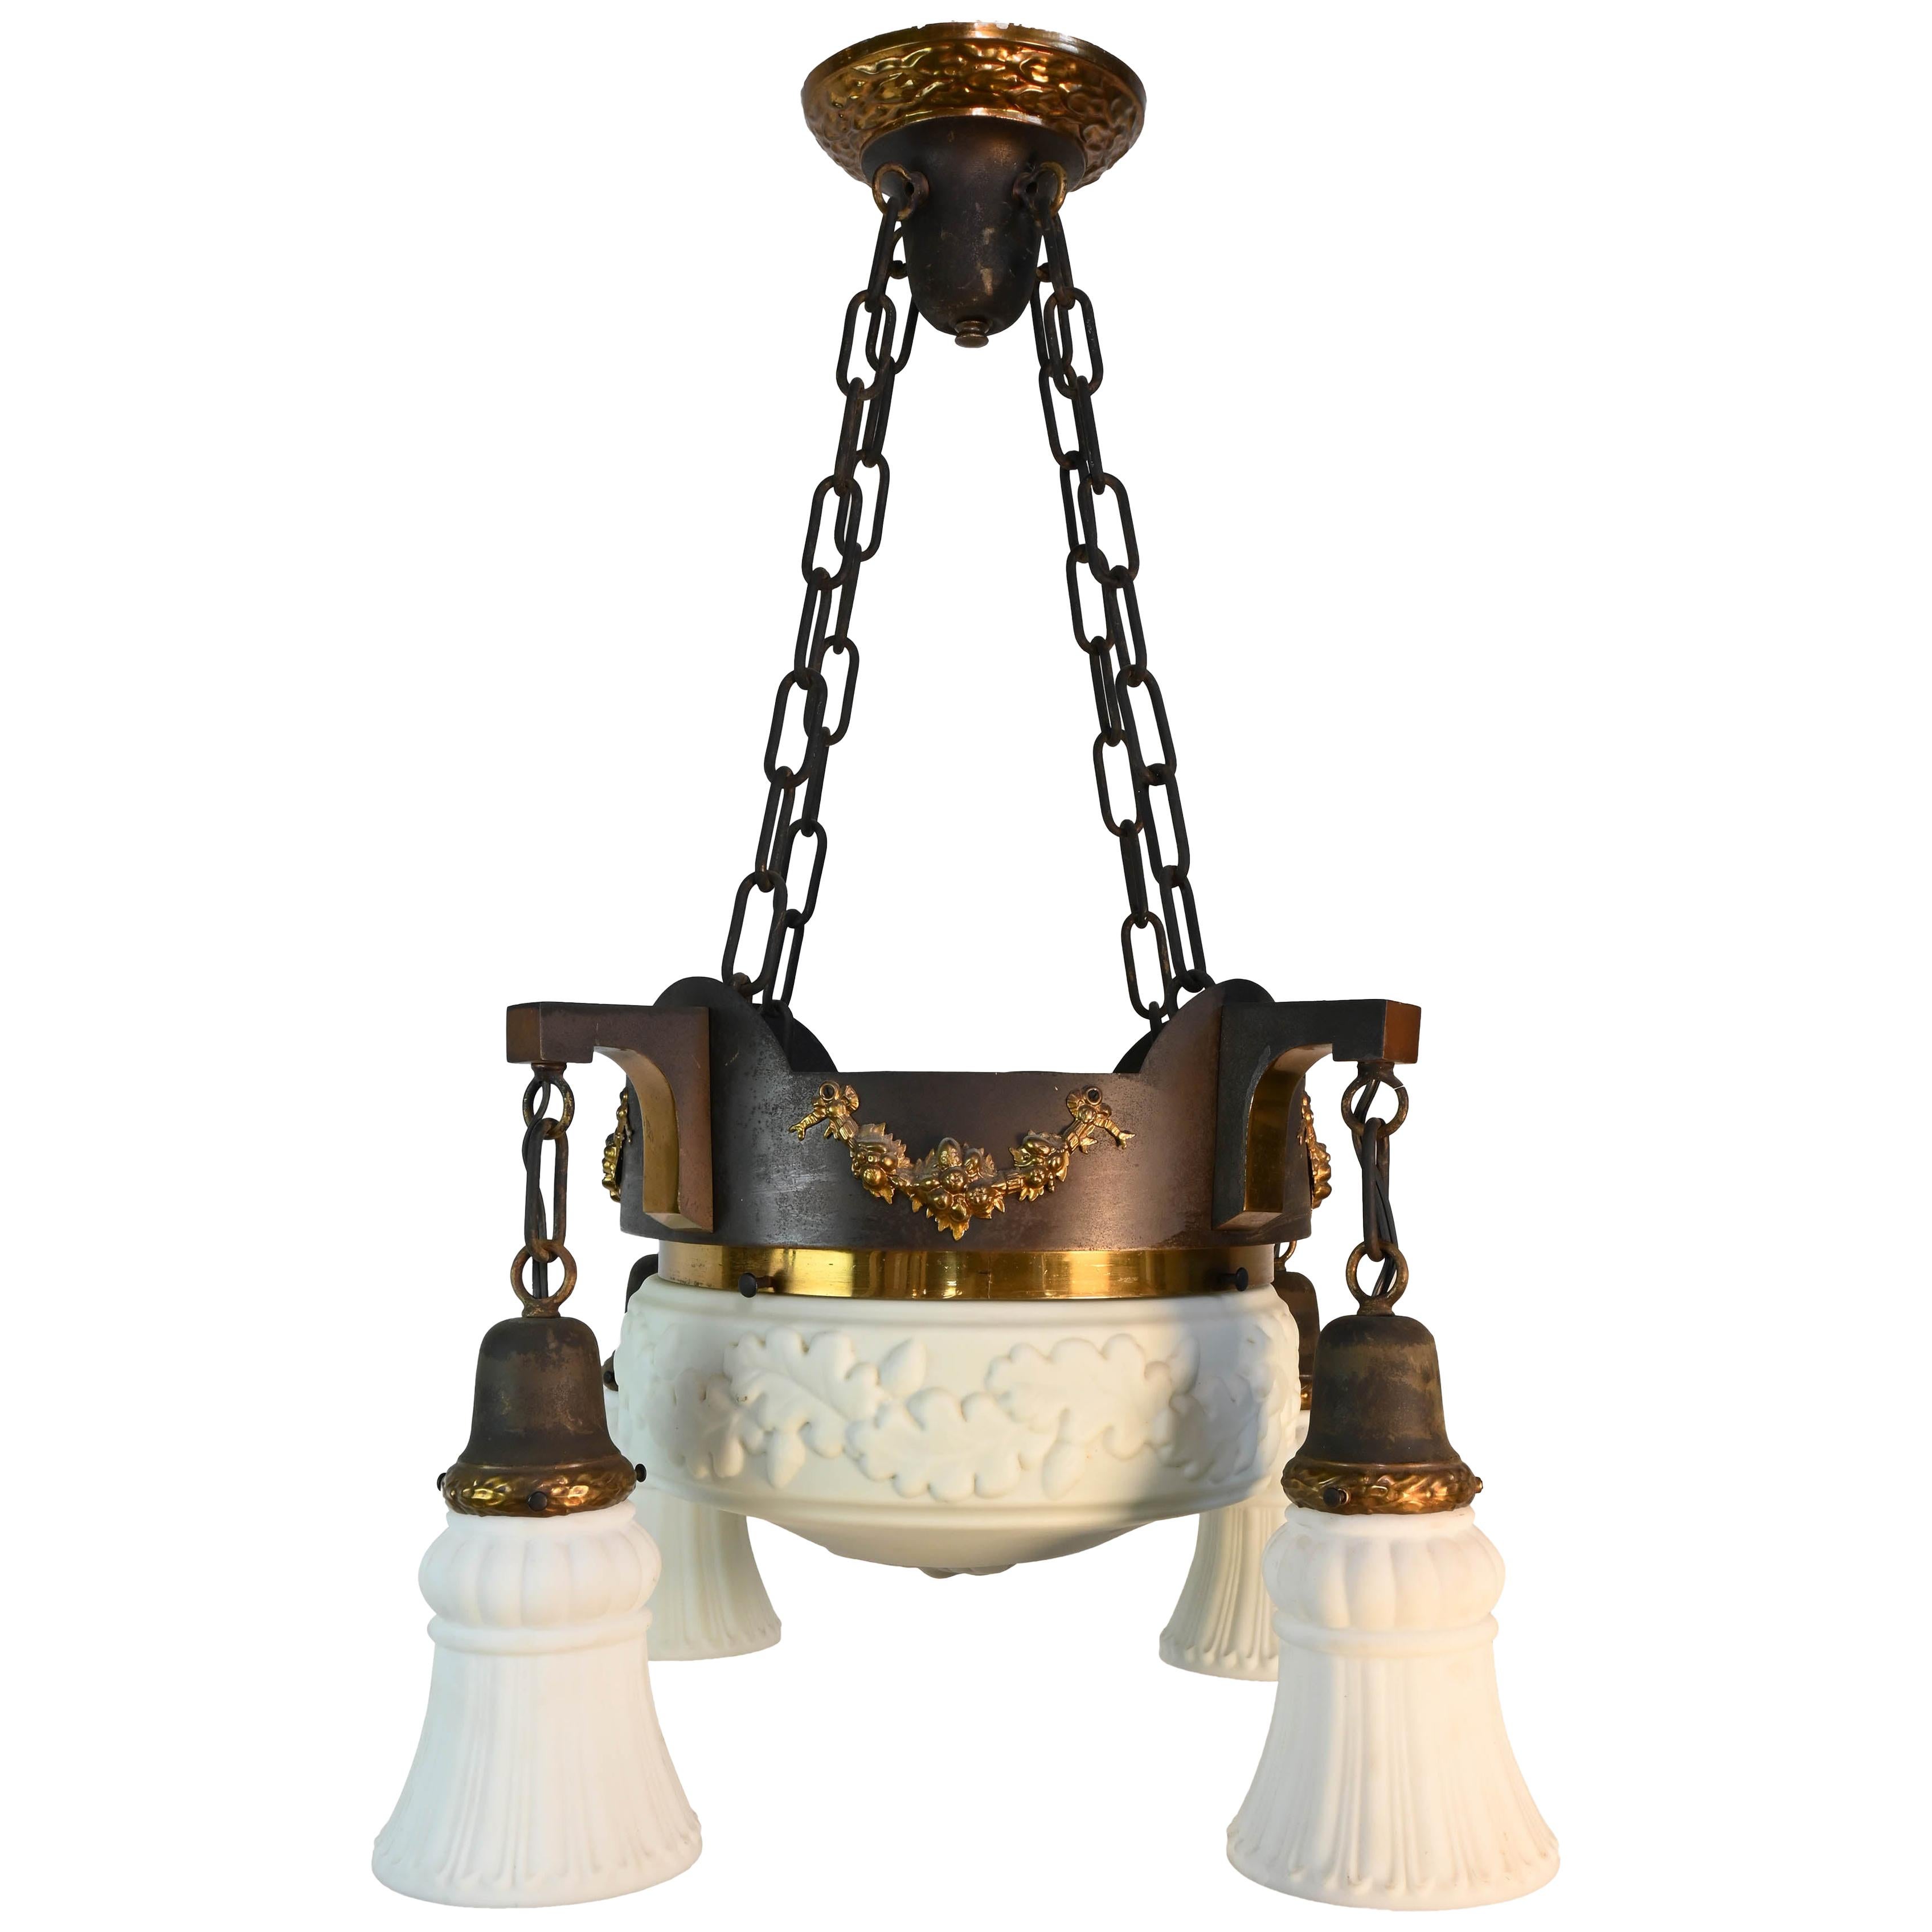 Milkglass Bowl Chandelier with 4 Shades